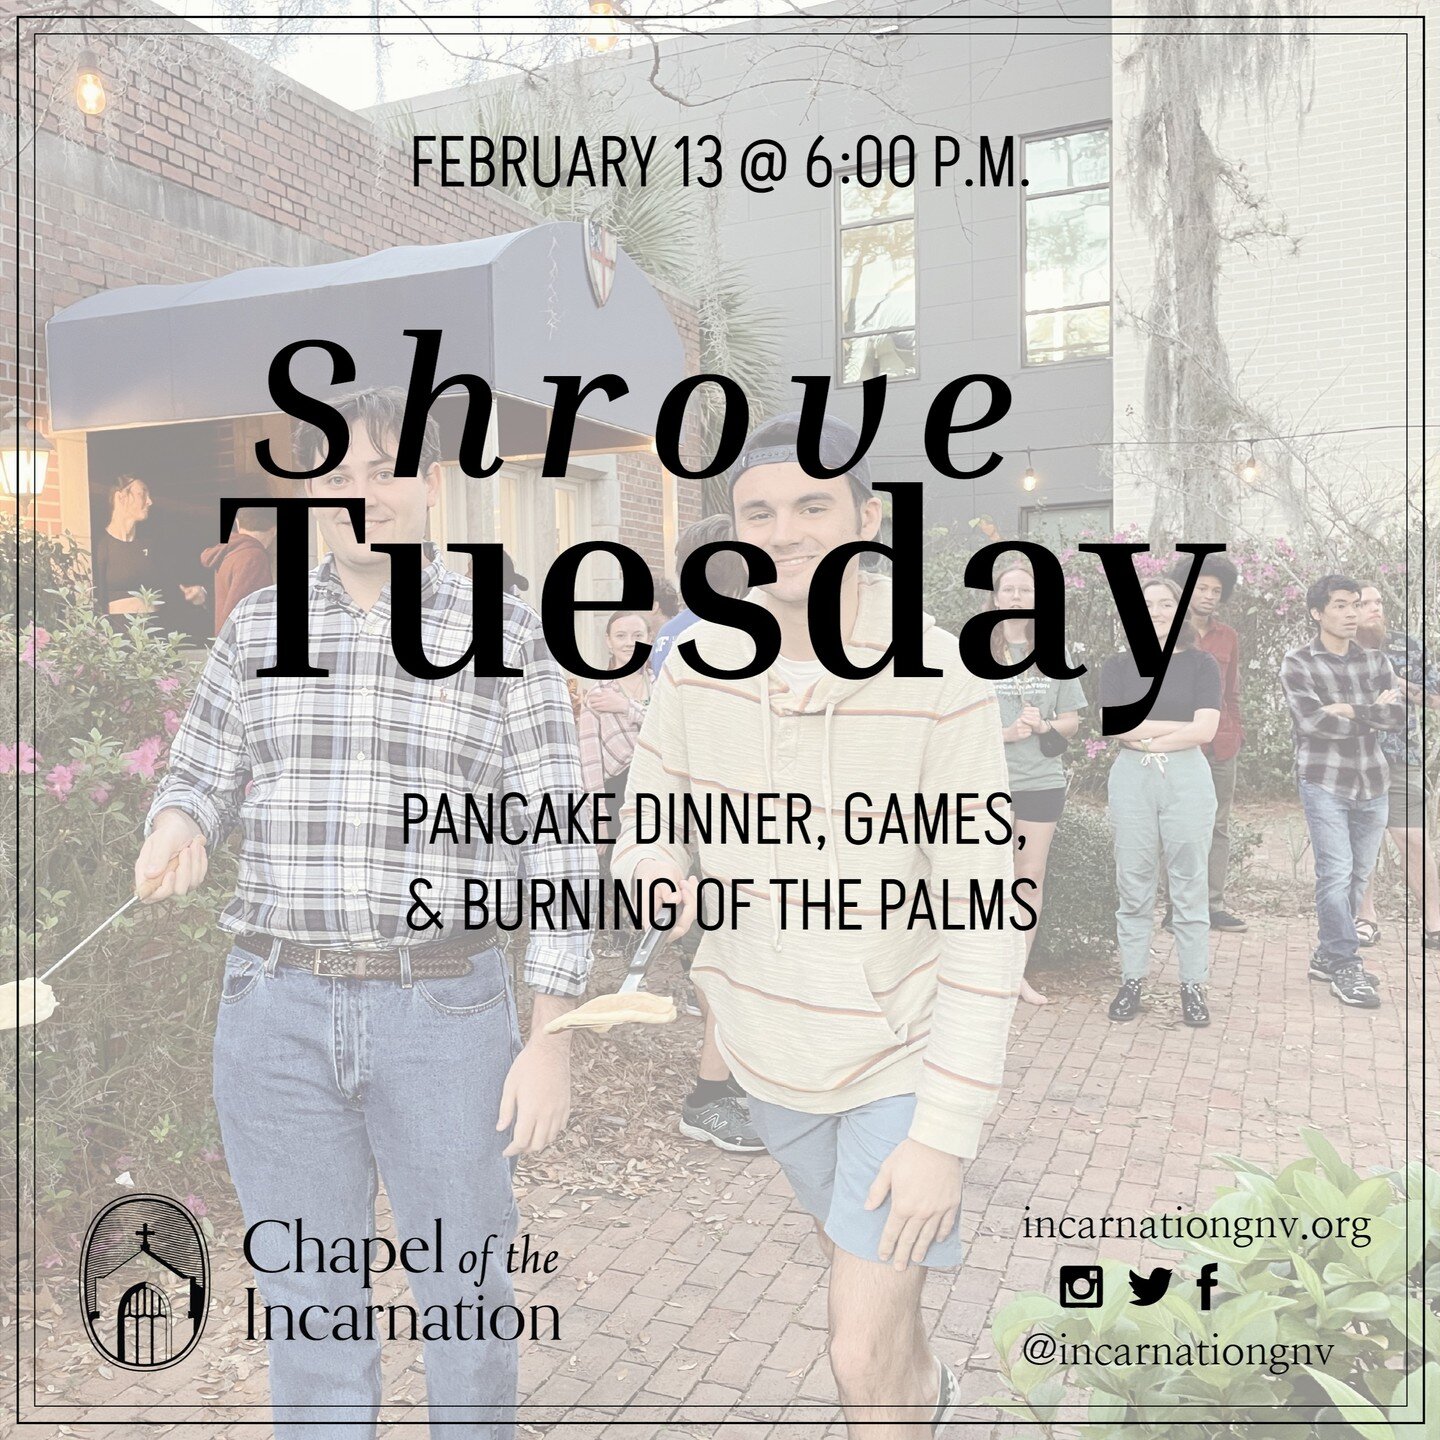 Next week! See you there!

Annual Shrove Tuesday Pancake Race - Tuesday, 2/13 @ 6:00 p.m.

Ash Wednesday, Imposition of Ashes - Wednesday, 2/14 @ 7:00 p.m.